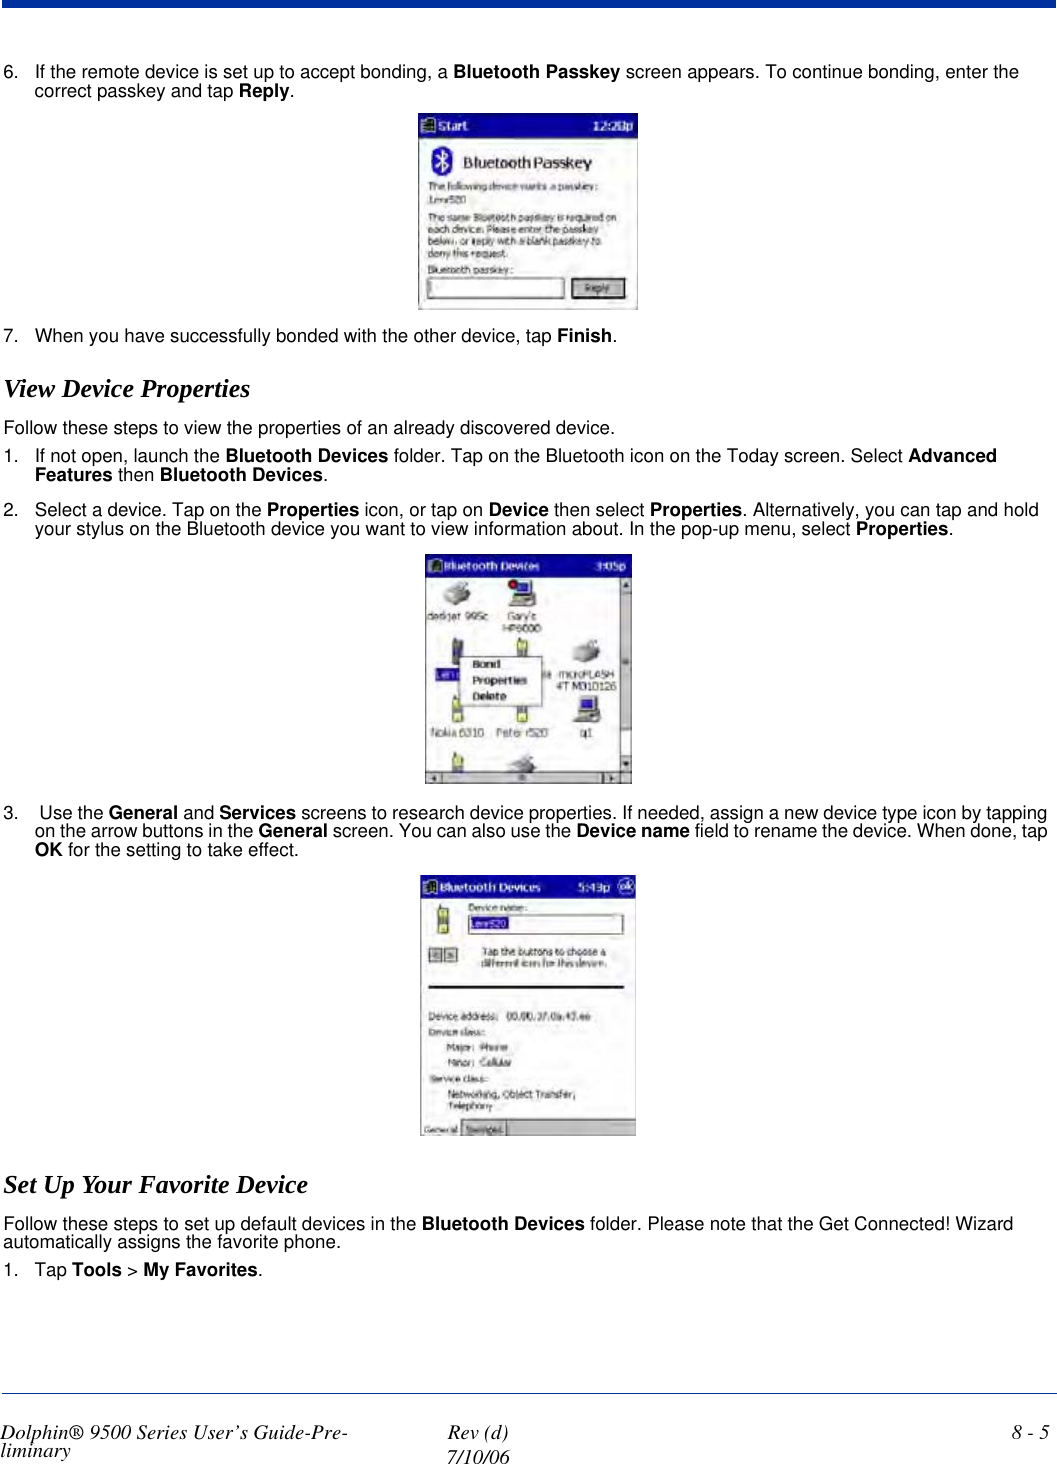 Dolphin® 9500 Series User’s Guide-Pre-liminary  Rev (d)7/10/068 - 56. If the remote device is set up to accept bonding, a Bluetooth Passkey screen appears. To continue bonding, enter the correct passkey and tap Reply.7. When you have successfully bonded with the other device, tap Finish.View Device PropertiesFollow these steps to view the properties of an already discovered device. 1. If not open, launch the Bluetooth Devices folder. Tap on the Bluetooth icon on the Today screen. Select Advanced Features then Bluetooth Devices.2. Select a device. Tap on the Properties icon, or tap on Device then select Properties. Alternatively, you can tap and hold your stylus on the Bluetooth device you want to view information about. In the pop-up menu, select Properties.3.  Use the General and Services screens to research device properties. If needed, assign a new device type icon by tapping on the arrow buttons in the General screen. You can also use the Device name field to rename the device. When done, tap OK for the setting to take effect.Set Up Your Favorite DeviceFollow these steps to set up default devices in the Bluetooth Devices folder. Please note that the Get Connected! Wizard automatically assigns the favorite phone.1. Tap Tools &gt; My Favorites. 